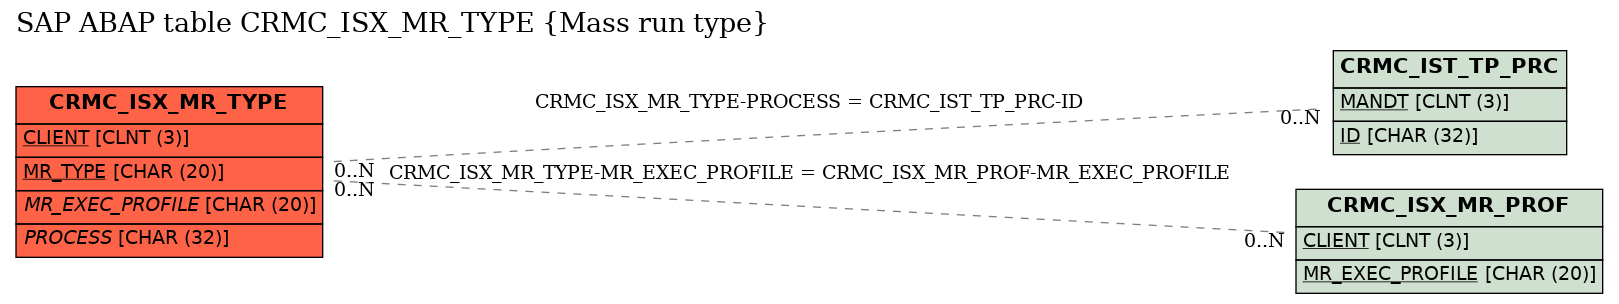 E-R Diagram for table CRMC_ISX_MR_TYPE (Mass run type)